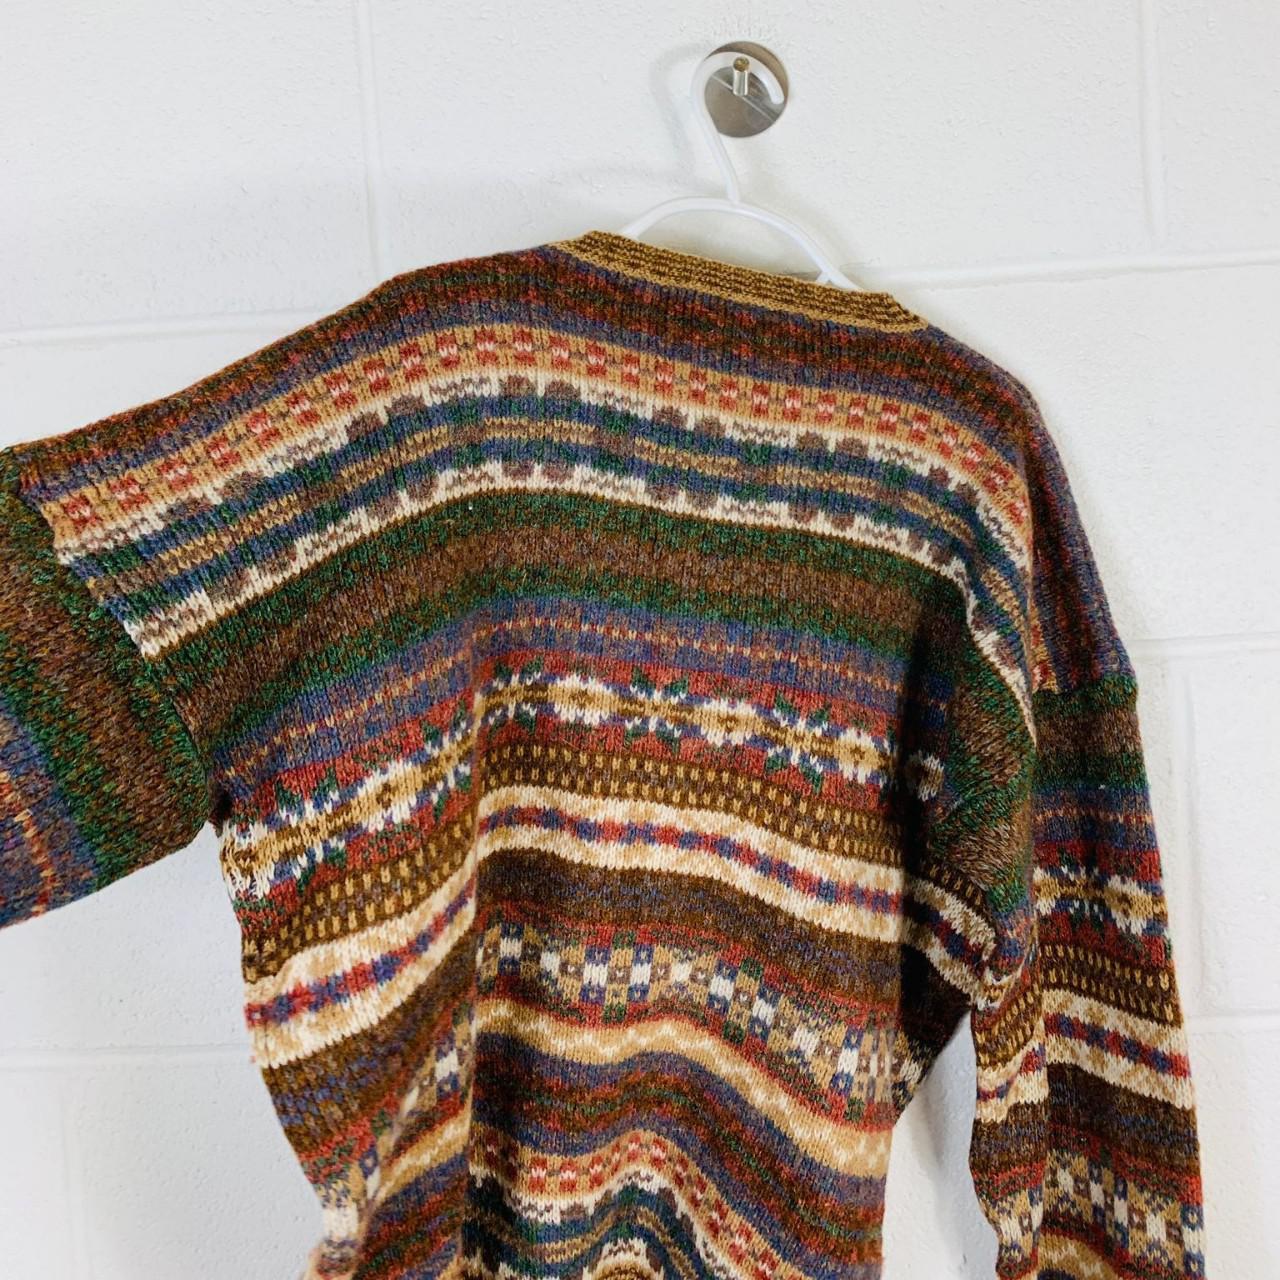 Product Image 4 - Vintage abstract knitted jumper

Brown and